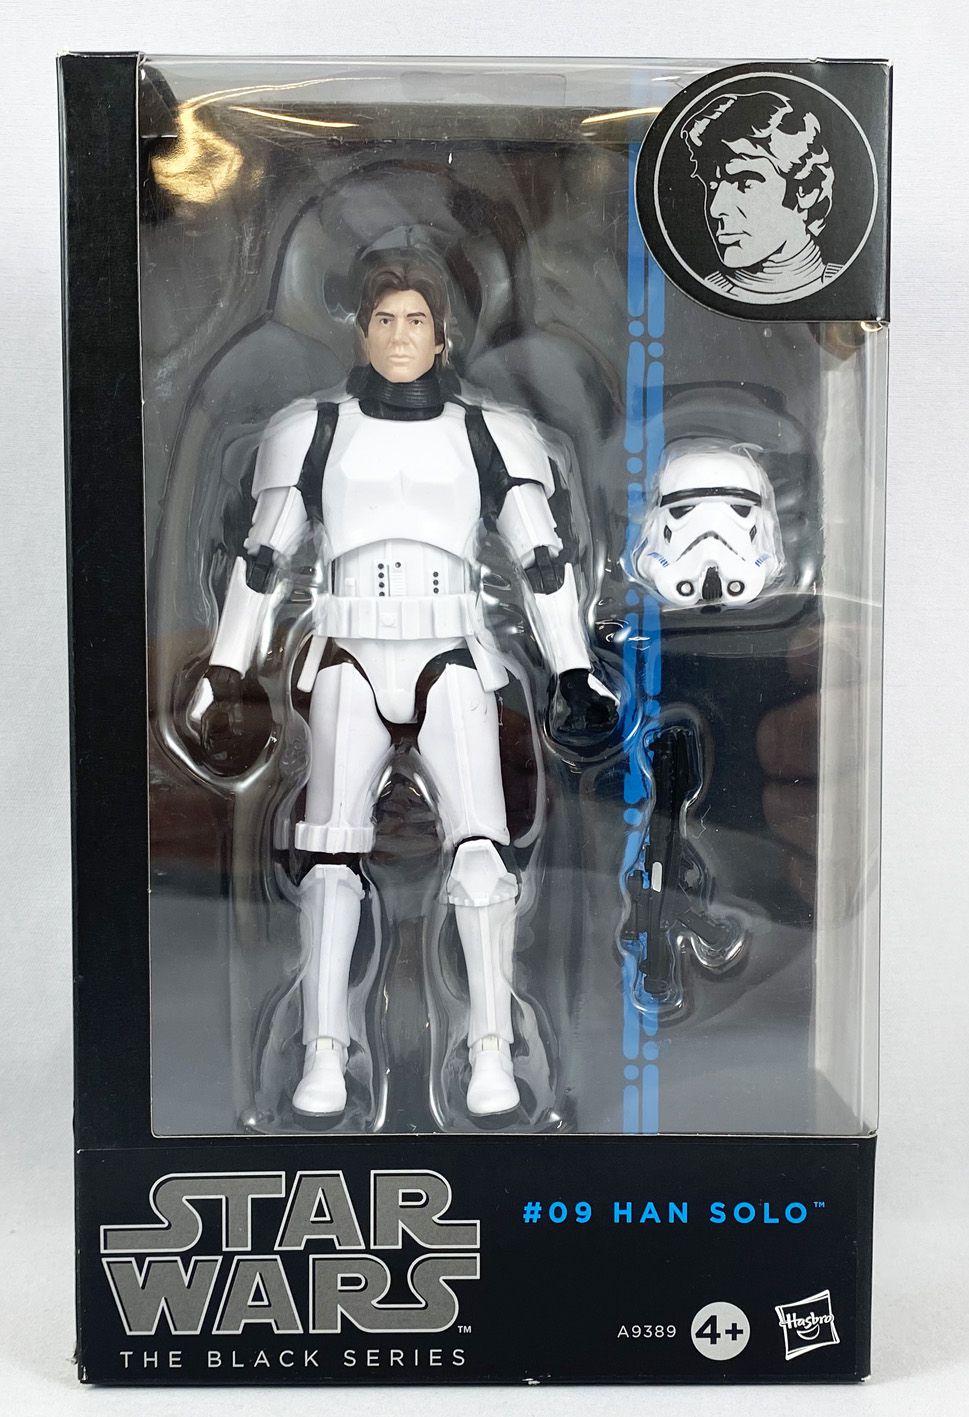 Han Solo #09 Star Wars The Black Series in Stormtrooper Disguise 6" NEW IN BOX 